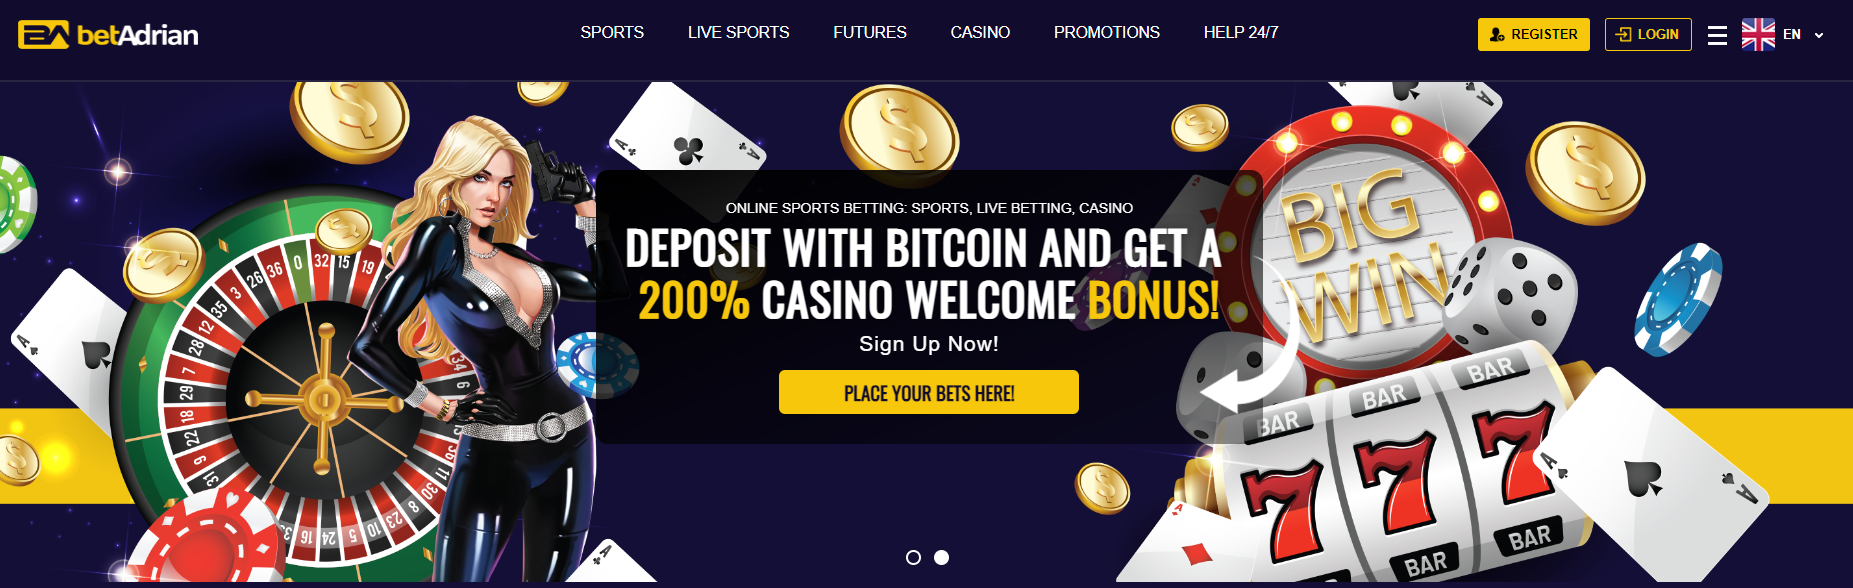 The 3 Really Obvious Ways To bitcoin gambling site Better That You Ever Did